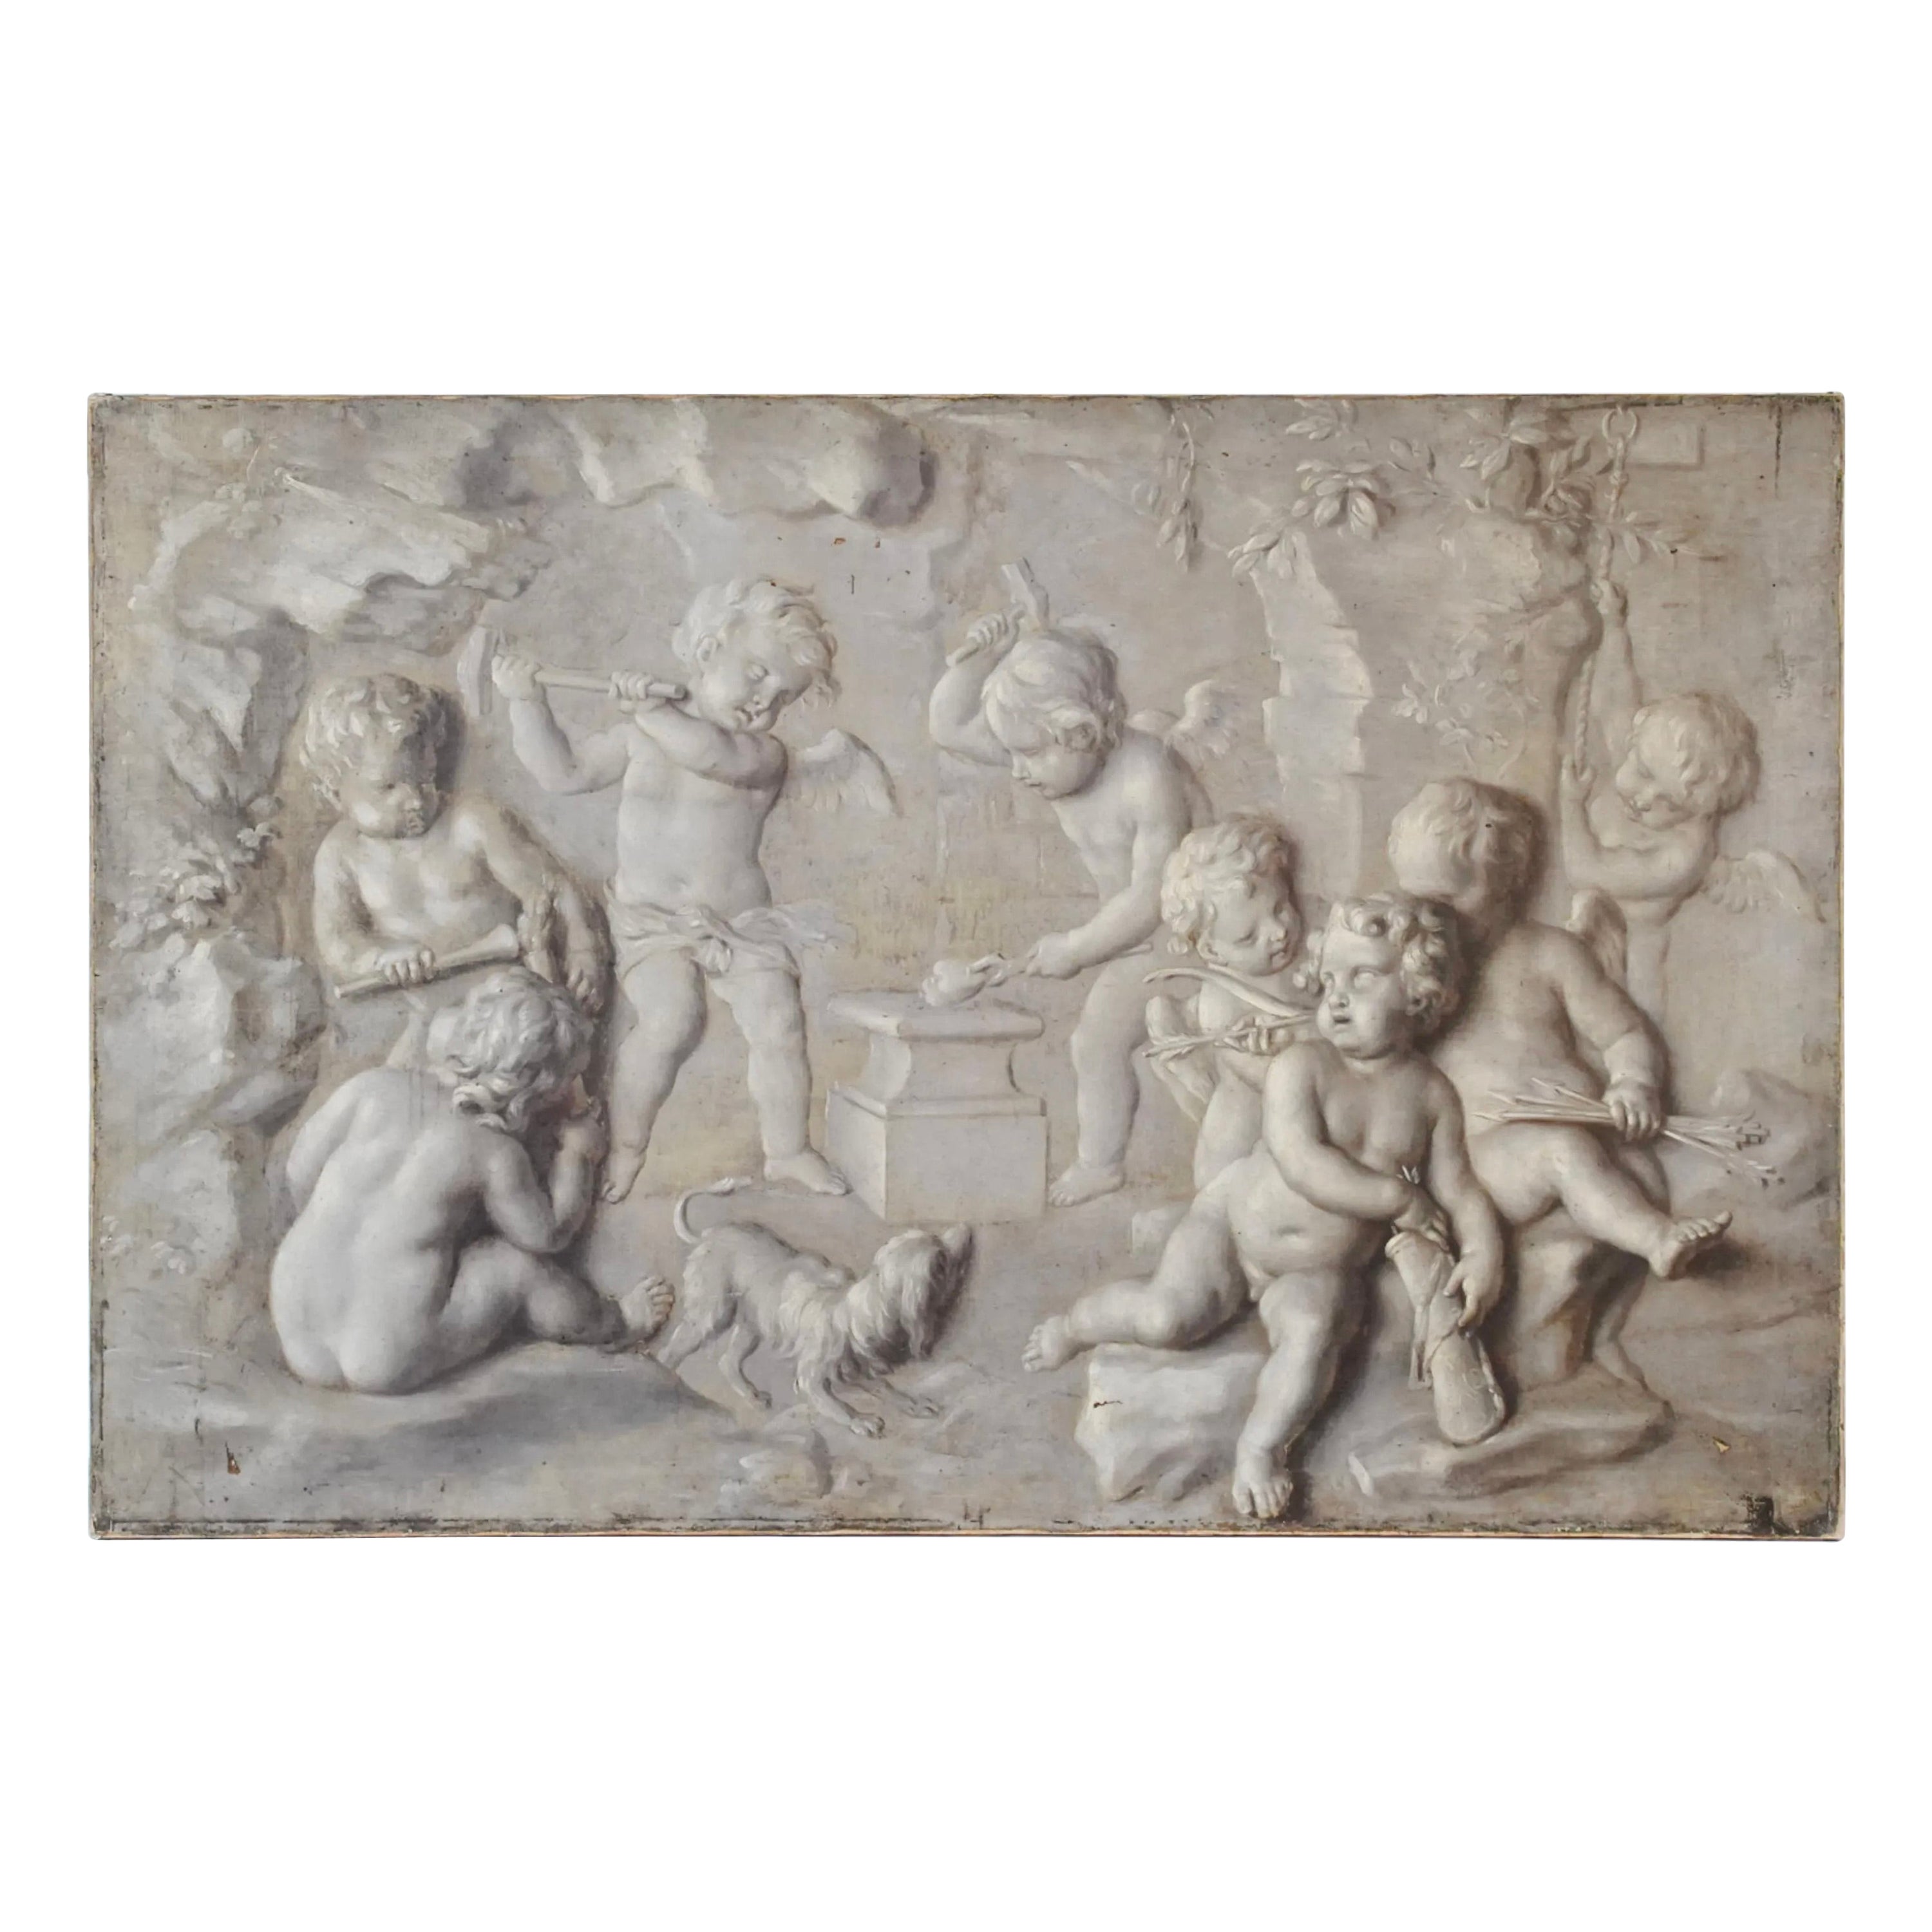 18th Century Grisaille Painting of Putti Attributed to Piat Joseph Sauvage